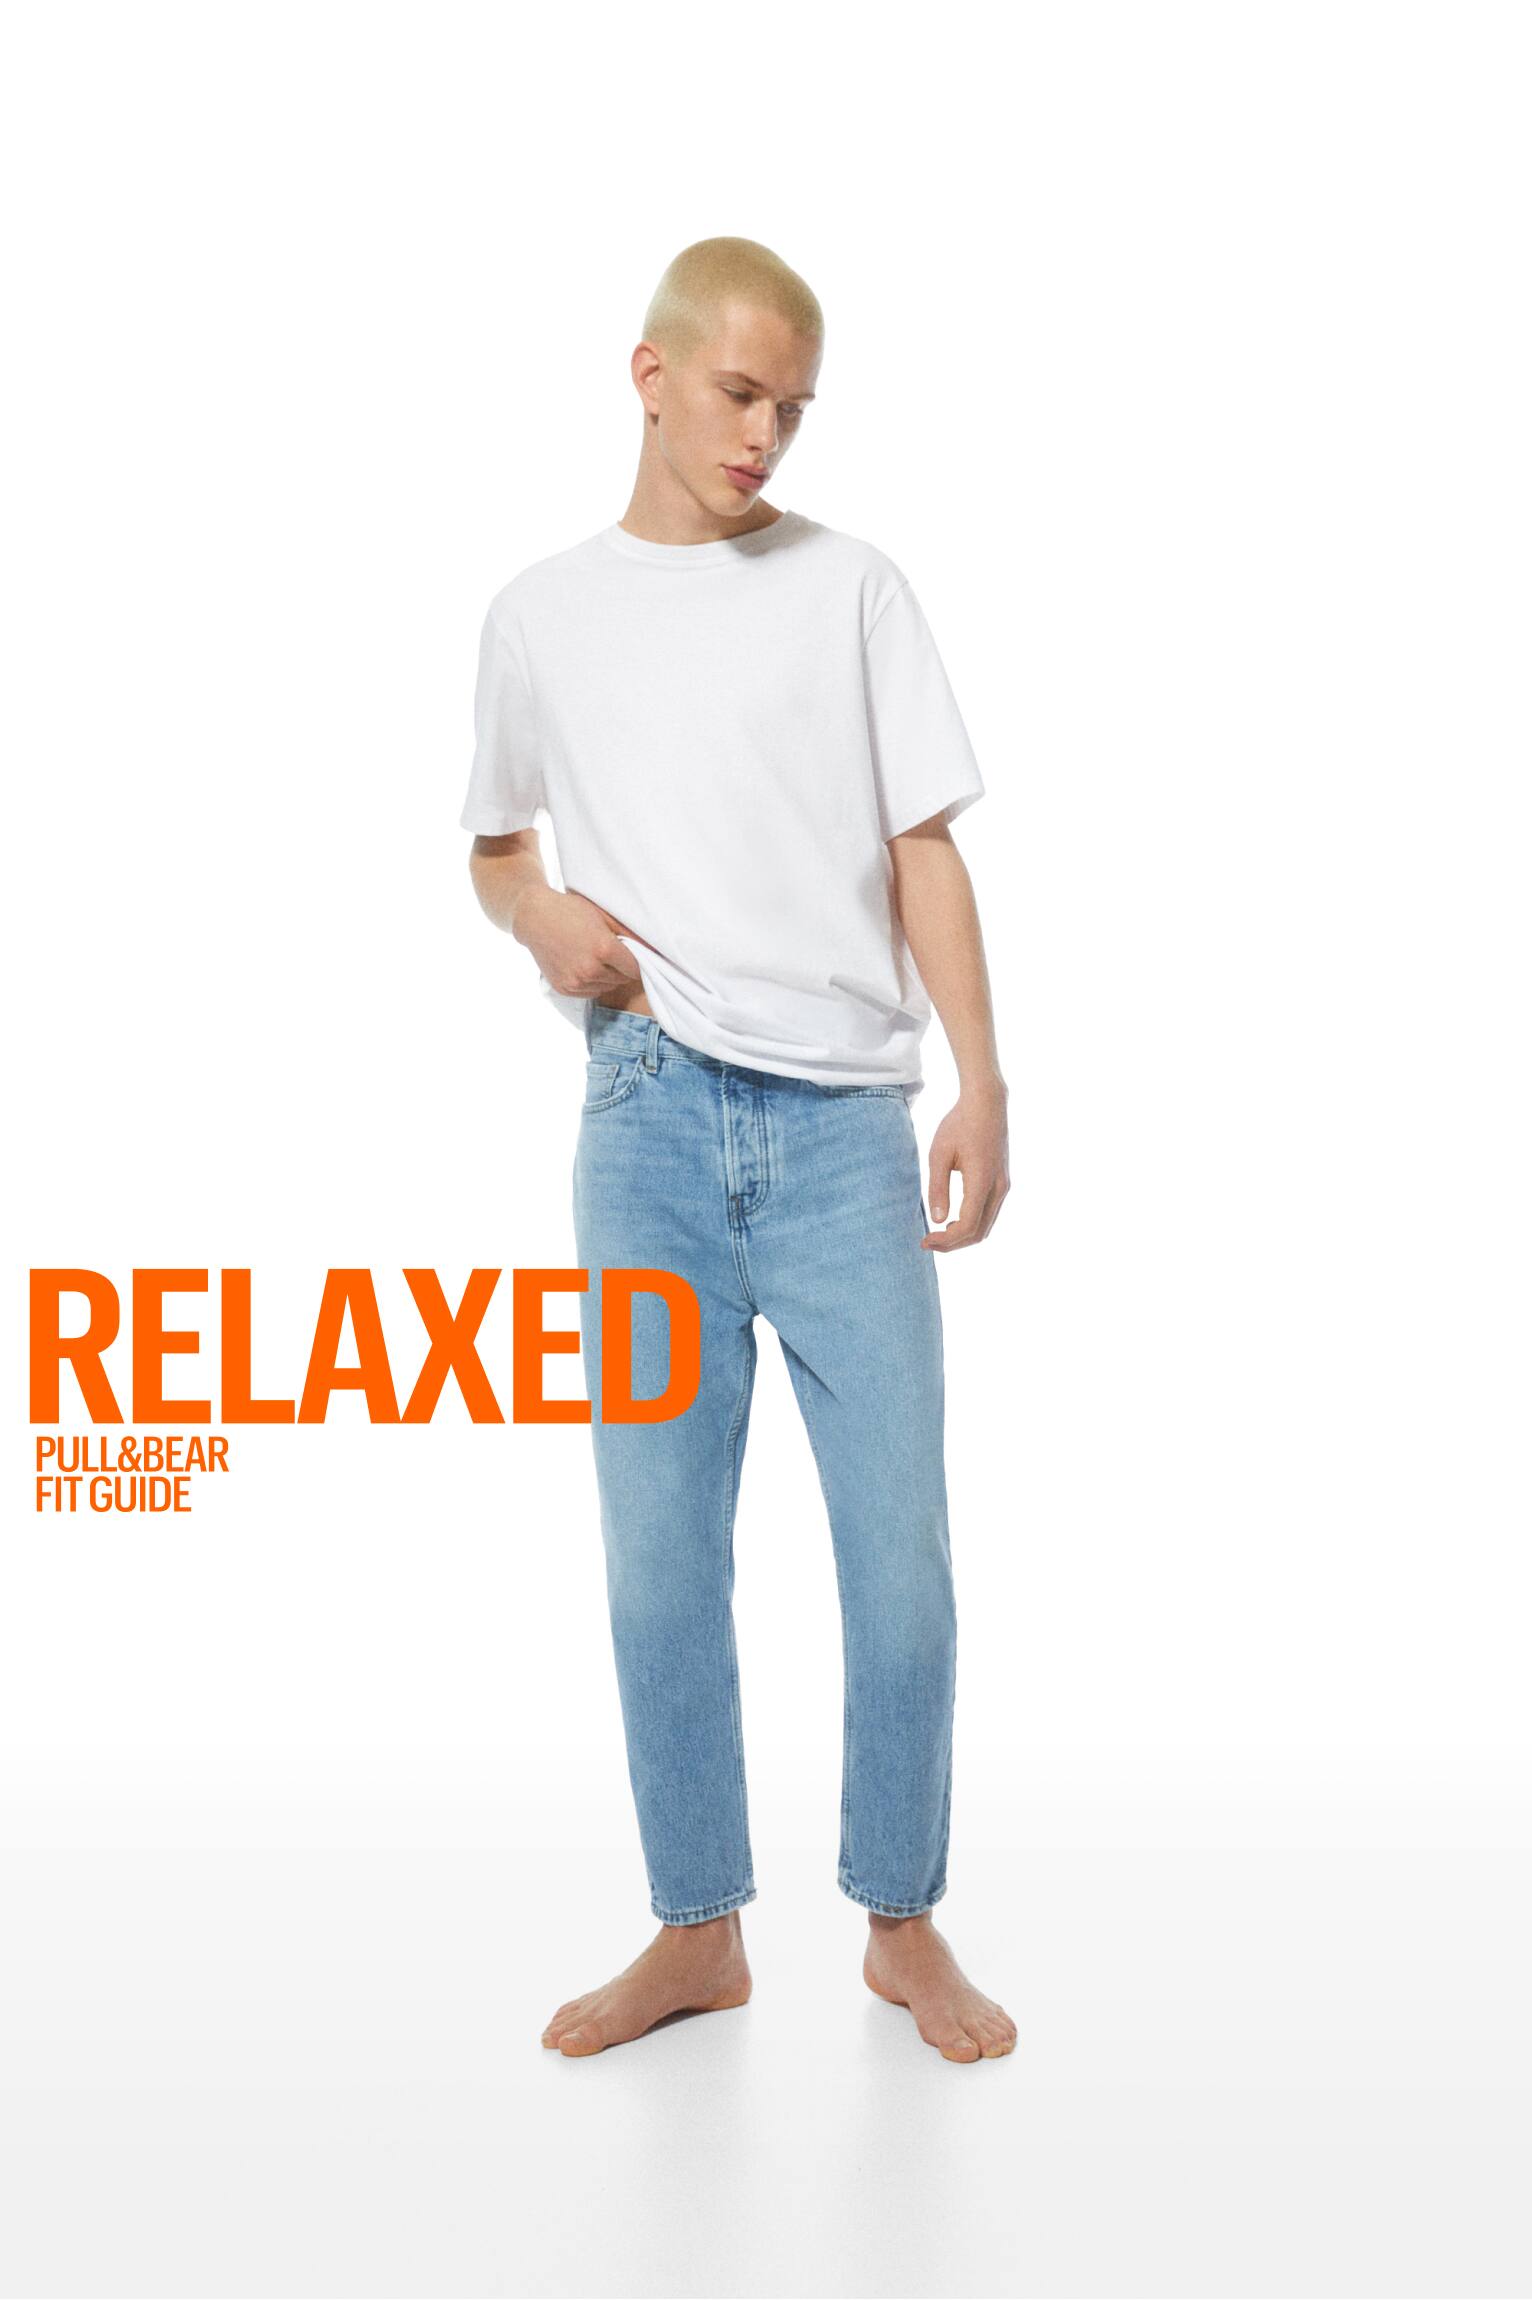 Vaqueros Anchos | Relaxed Fit Jeans PULL&BEAR